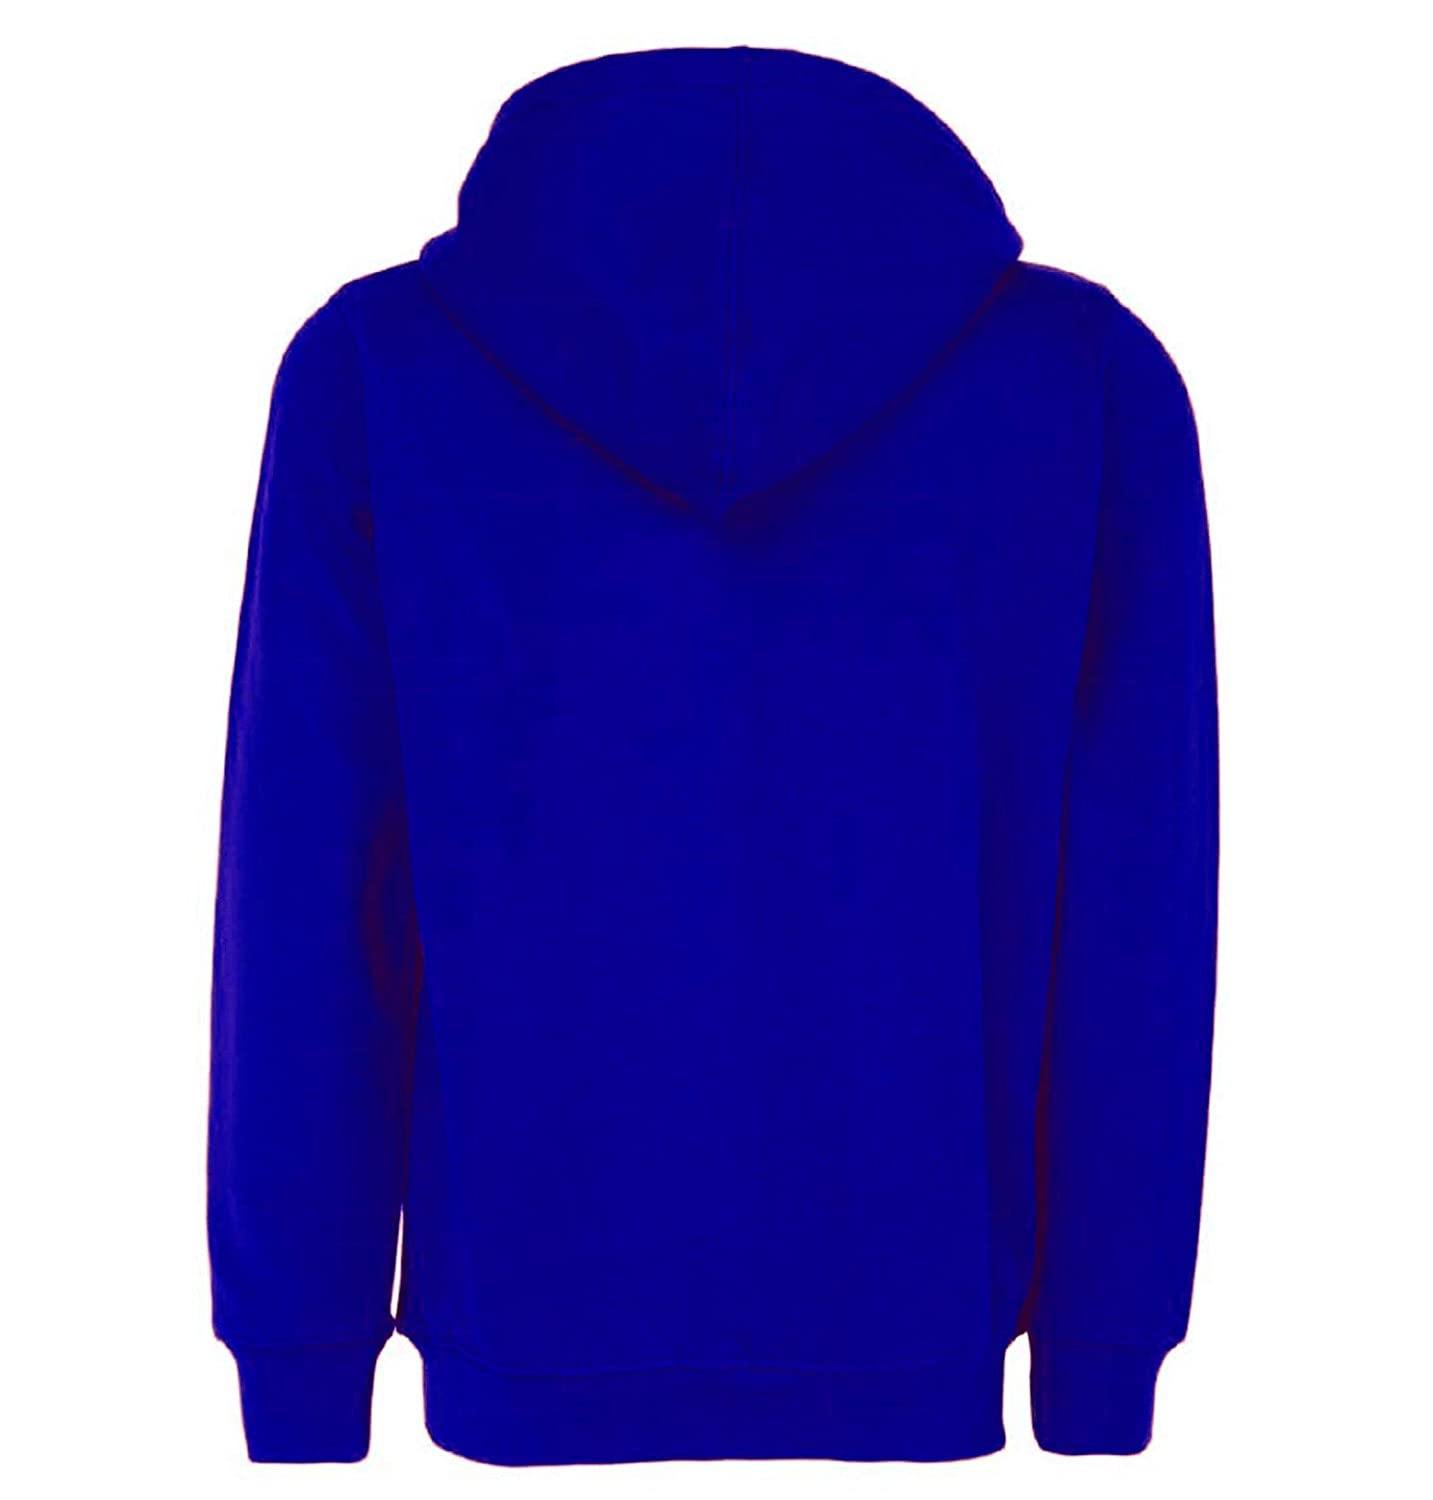 Prokick Kid's Rich Cotton Full Sleeves Zipper Jacket with Hoodies for Girls and Boys Blue - Best Price online Prokicksports.com